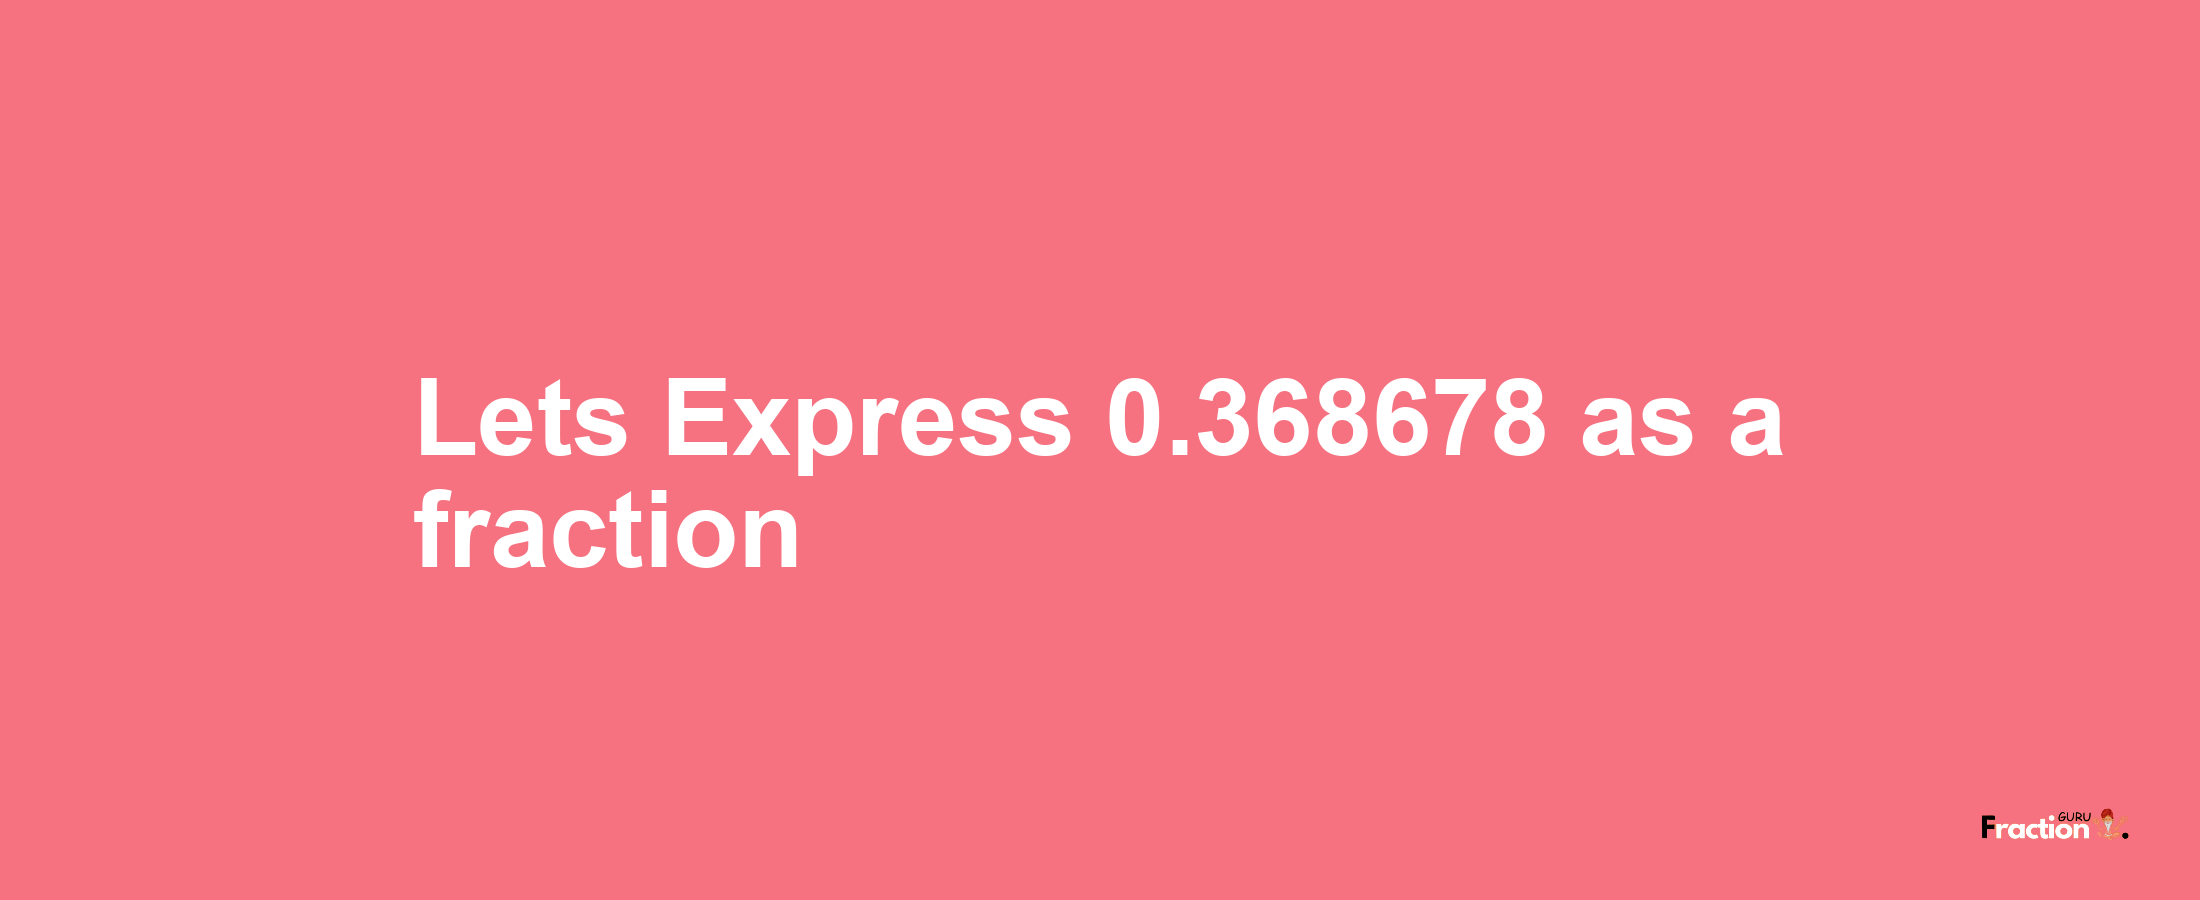 Lets Express 0.368678 as afraction